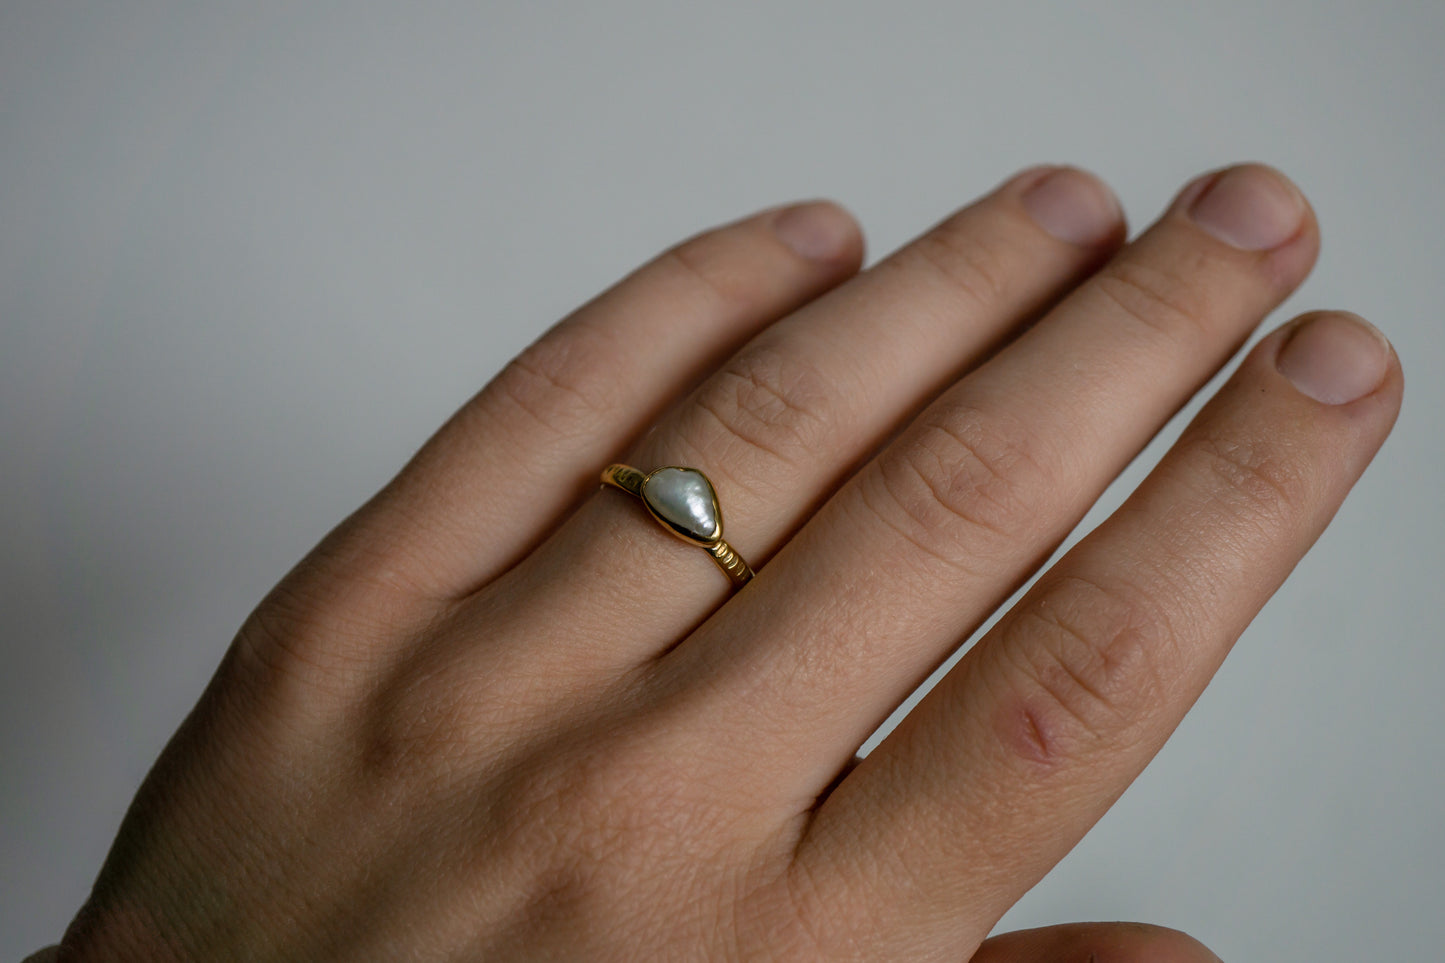 Pearl ring - gold plated, size 7